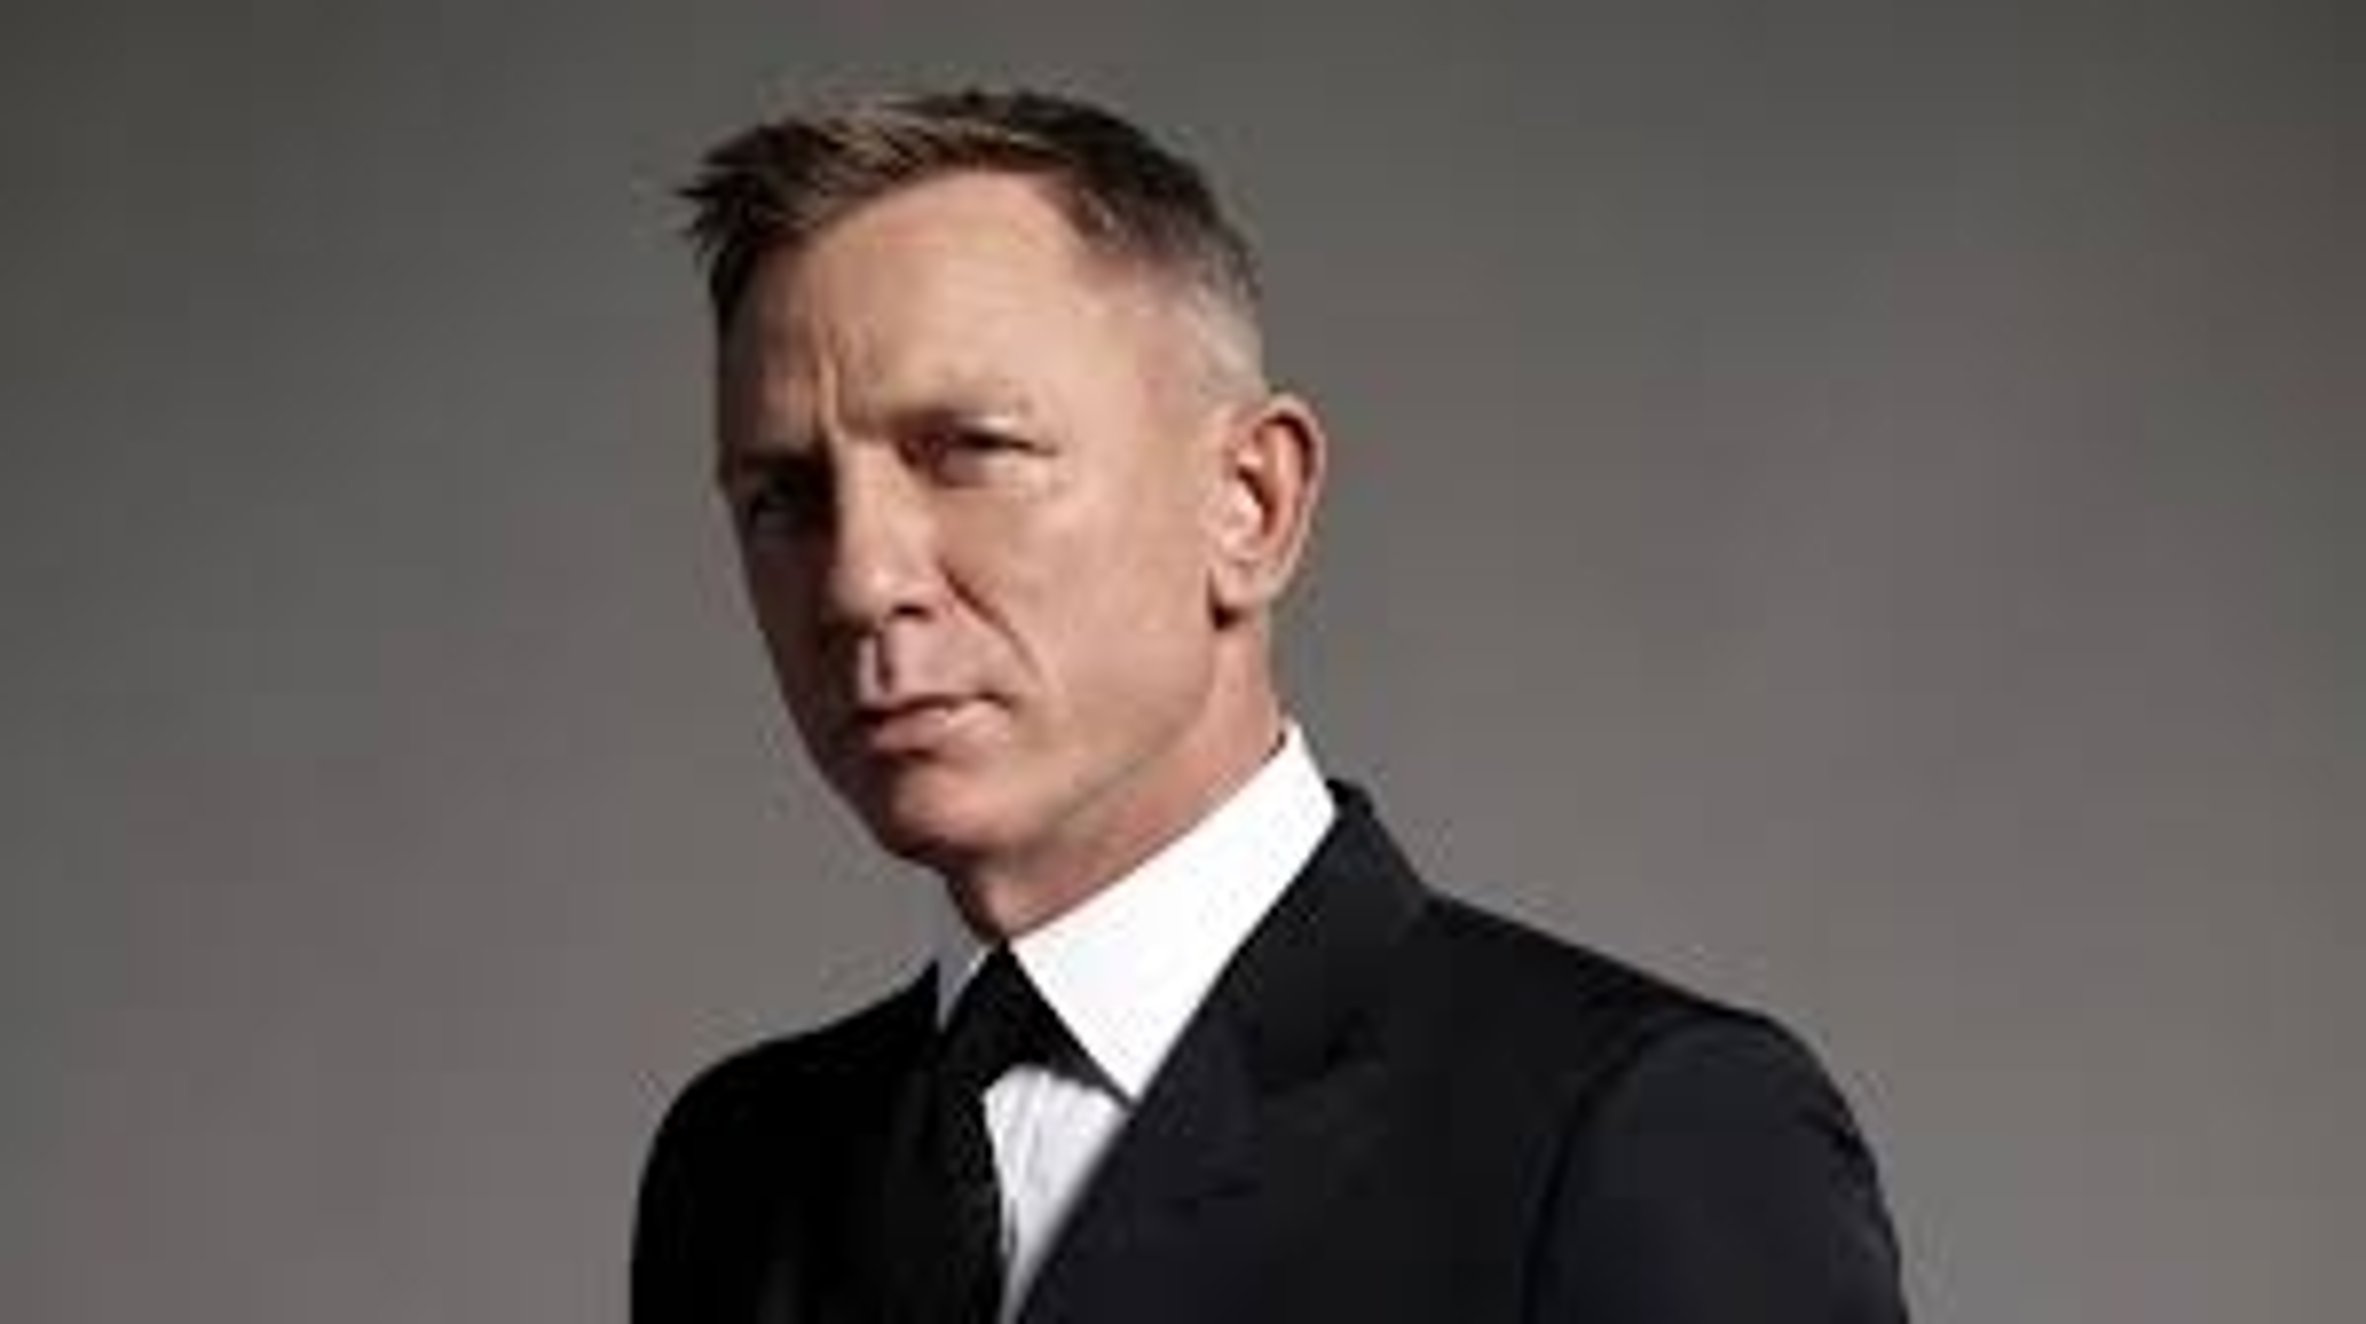 Daniel Craig Talks About What He’ll Miss About James Bond After No Time To Die